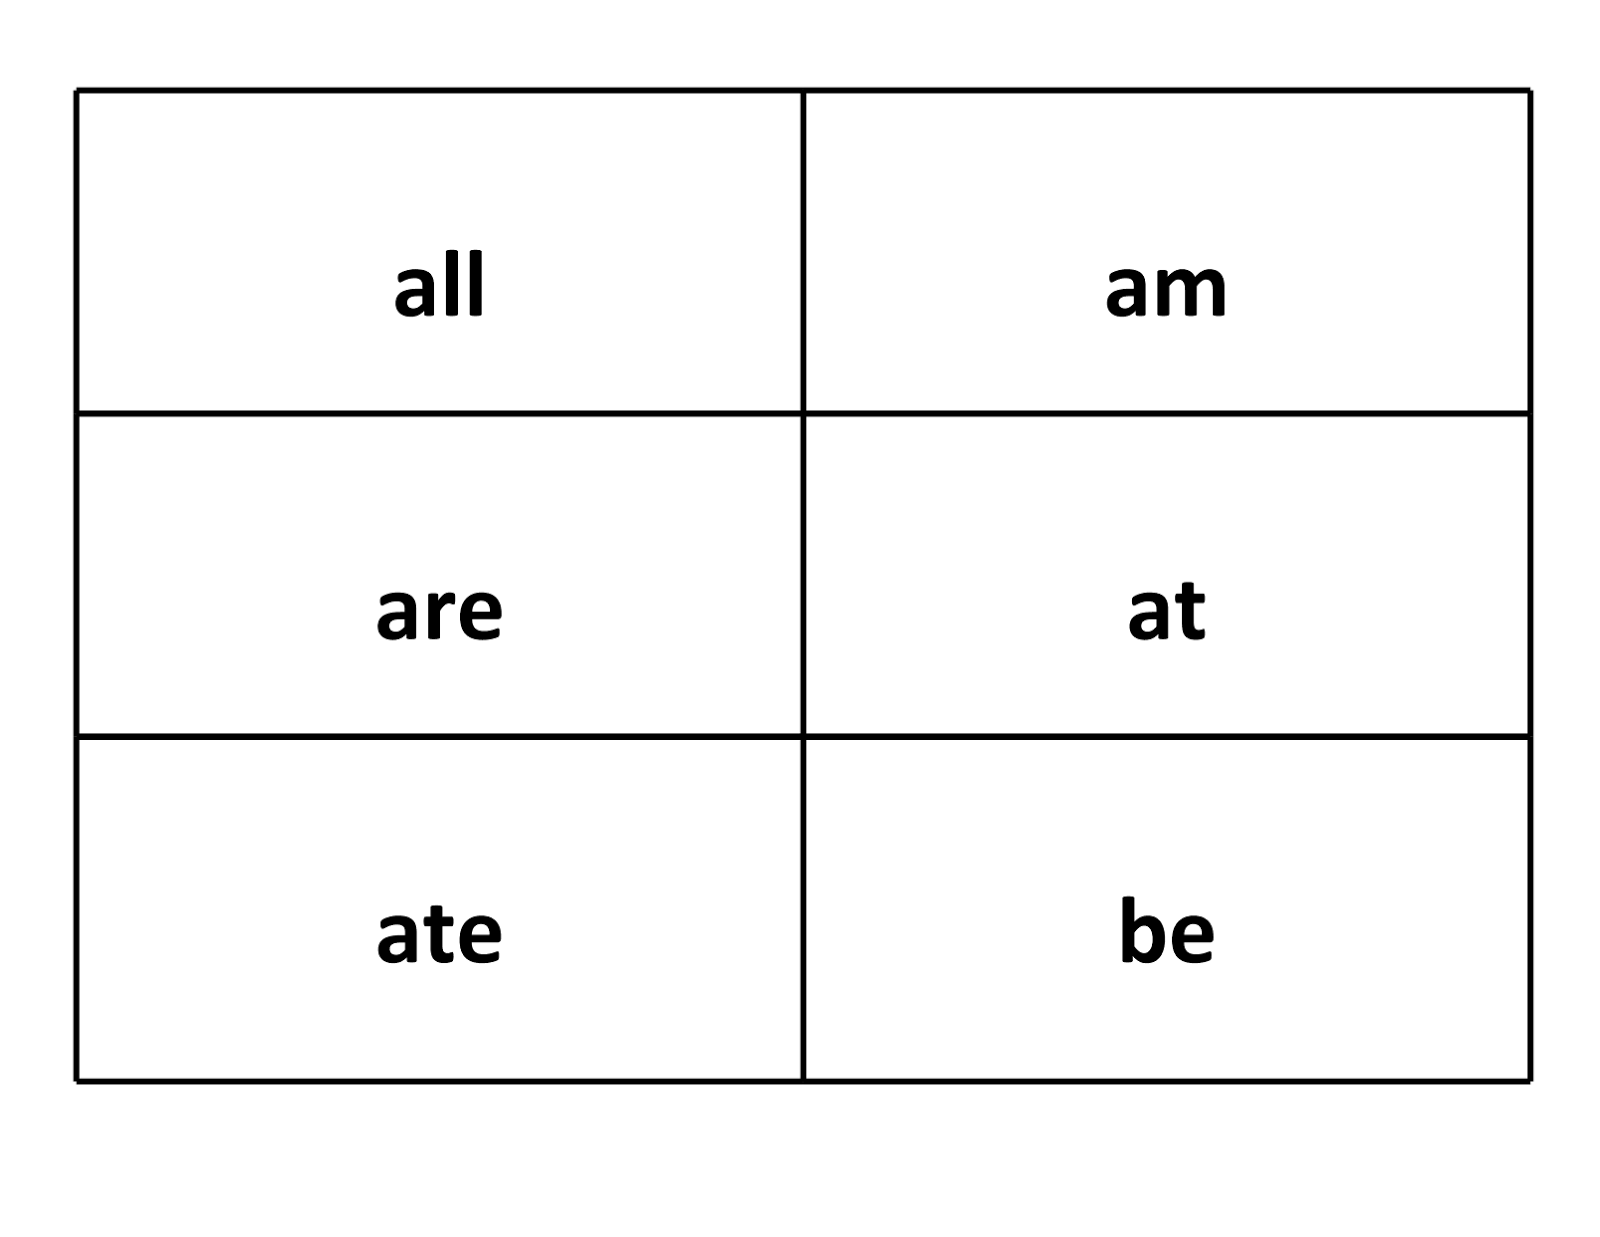 sight word flash card free printable all are ate am at be